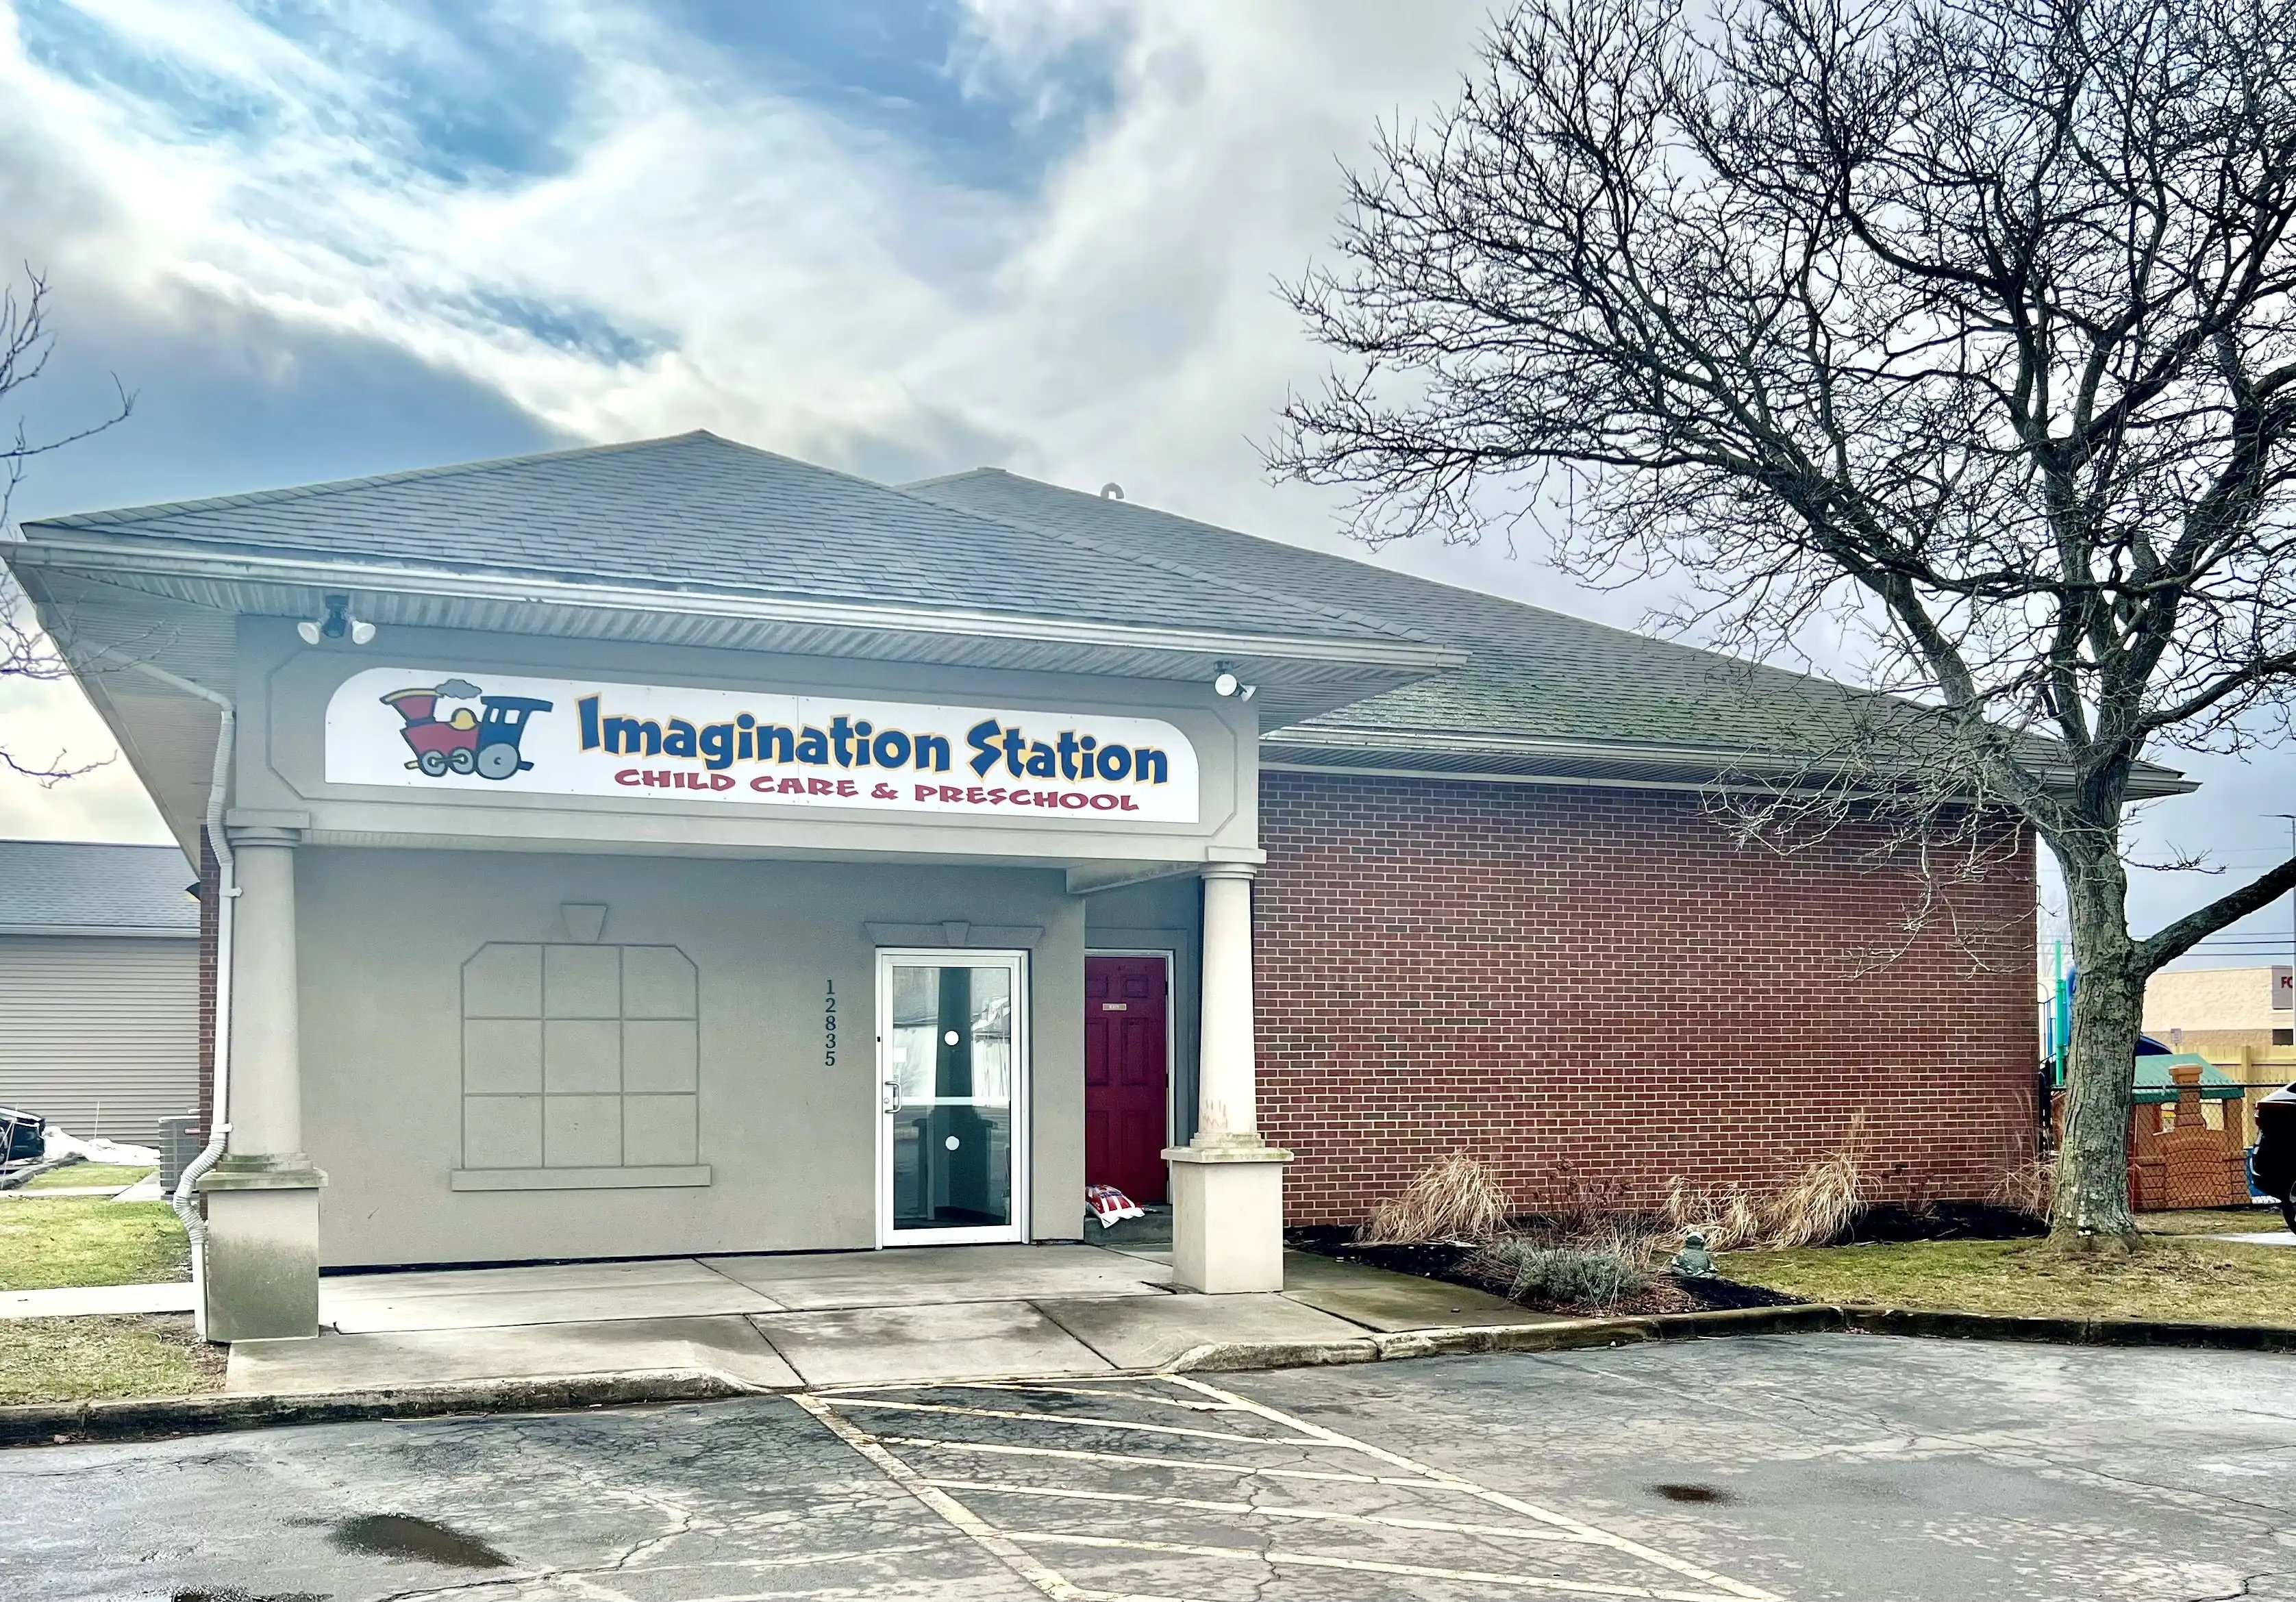 Imagination Station Alden offers top-tier daycare and early childhood education for infants to pre-k.